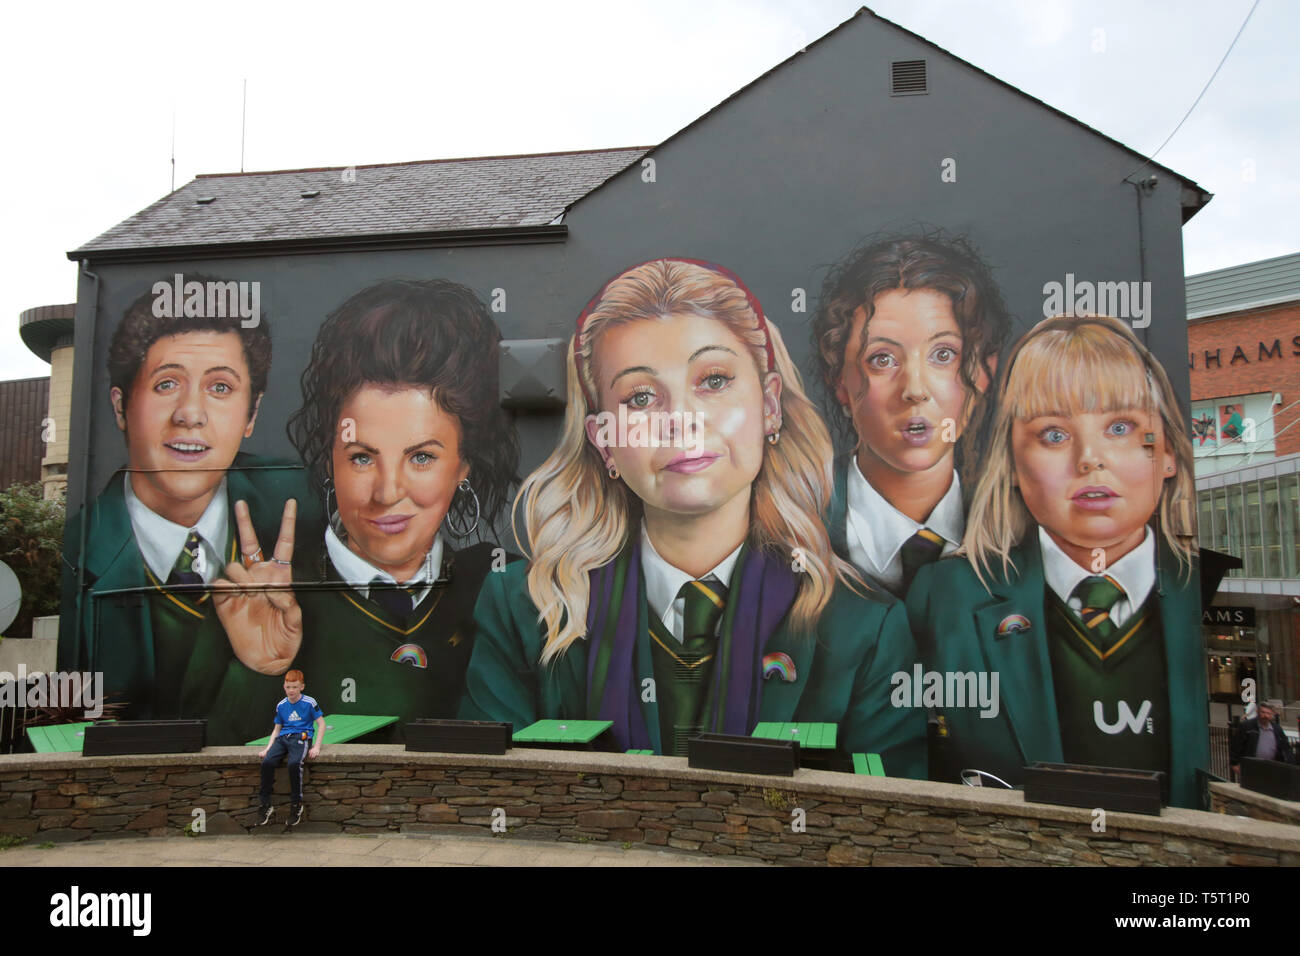 Derry, County Londonderry, Northern Ireland, 25th April, 2019 .A young boy sits on a wall in front of a mural showing characters from the Channel 4 TV hit show Derry Girls in Derry/Londonderry, Northern Ireland.  Derry Girls is a British television sitcom created and written by Lisa McGee. Staring Erin (Saoirse-Monica Jackson), her cousin Orla (Louisa Harland) and their friends Clare (Nicola Coughlan), Michelle (Jamie-Lee O'Donnell) and Michelle's English cousin James (Dylan Llewellyn) navigate their teen years during the Troubles in Derry, where they all attend a Catholic girls' secondary sch Stock Photo